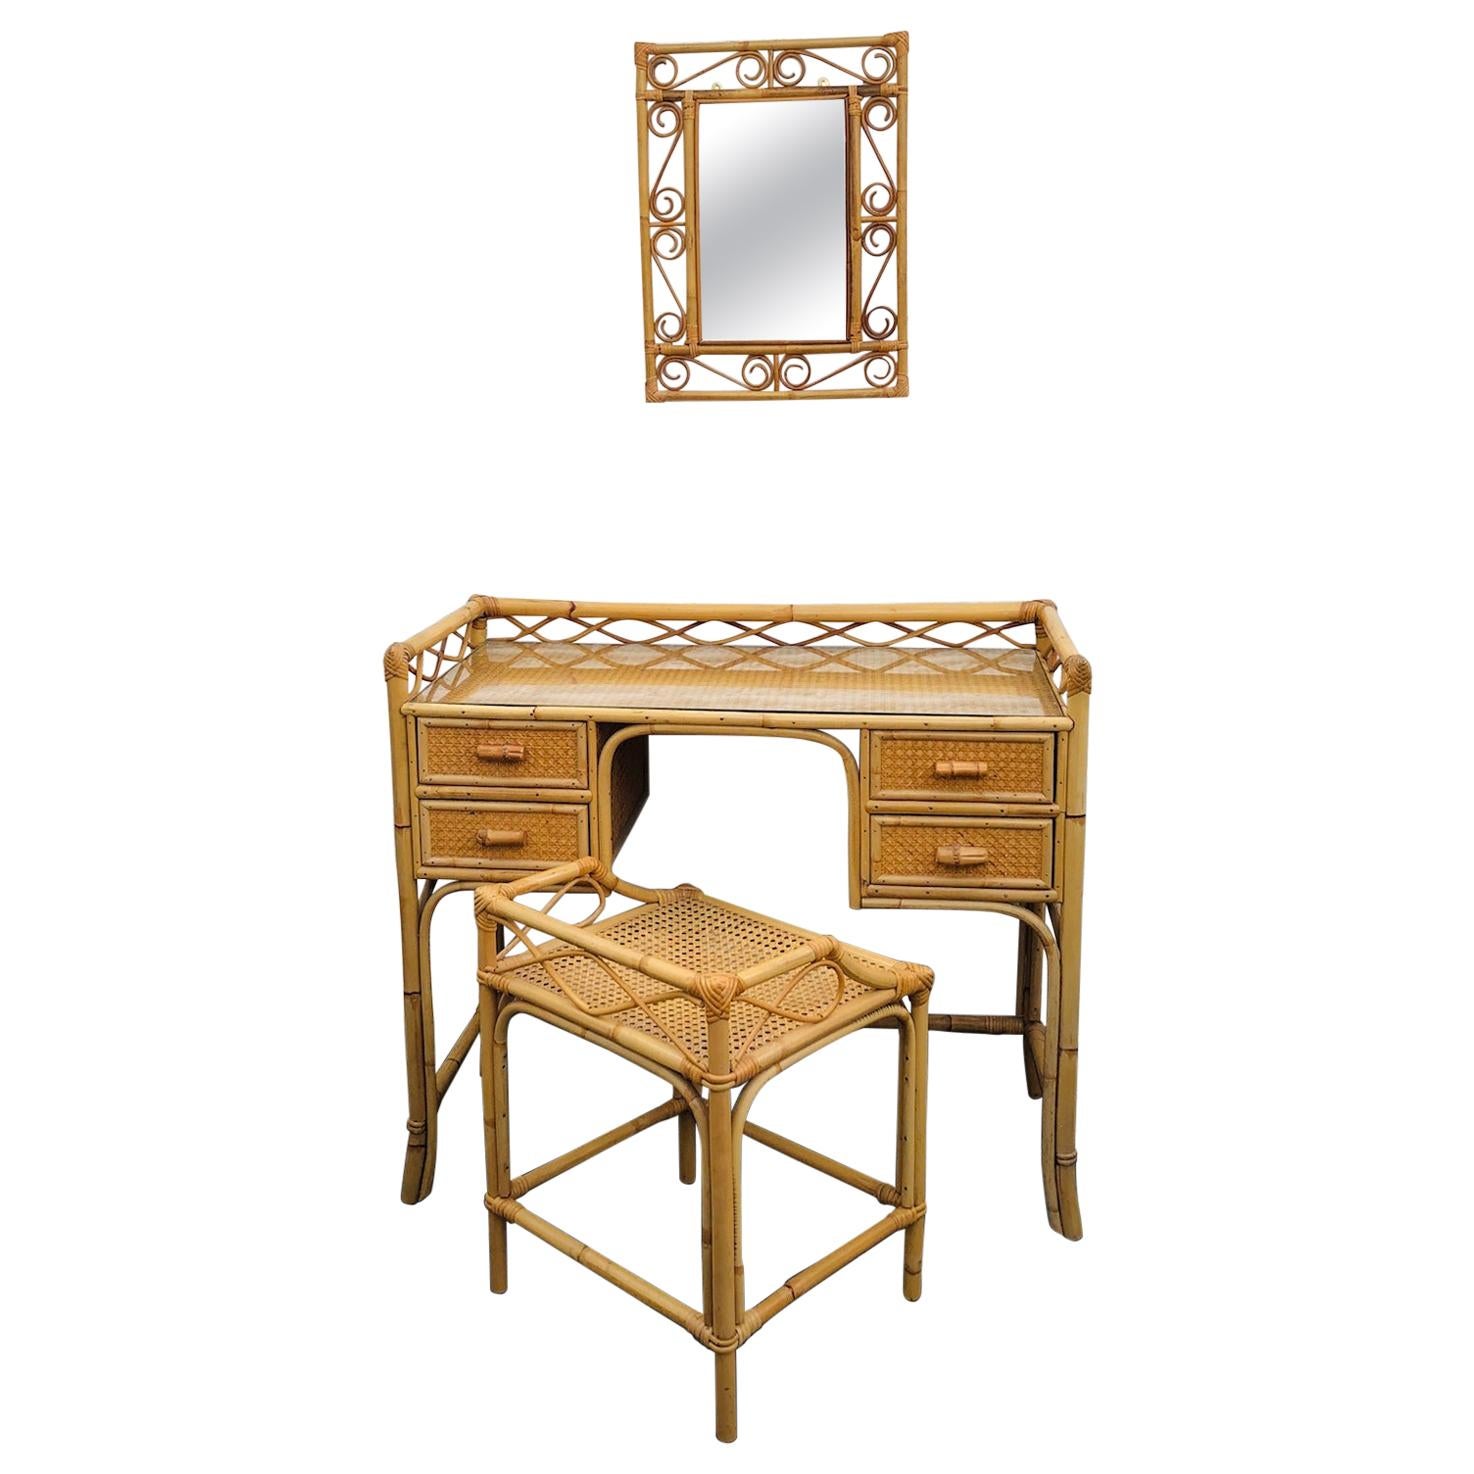 MidCentury Rattan Cane Dressing Table / Desk, Stool and Mirror Set, Eng. 1970s